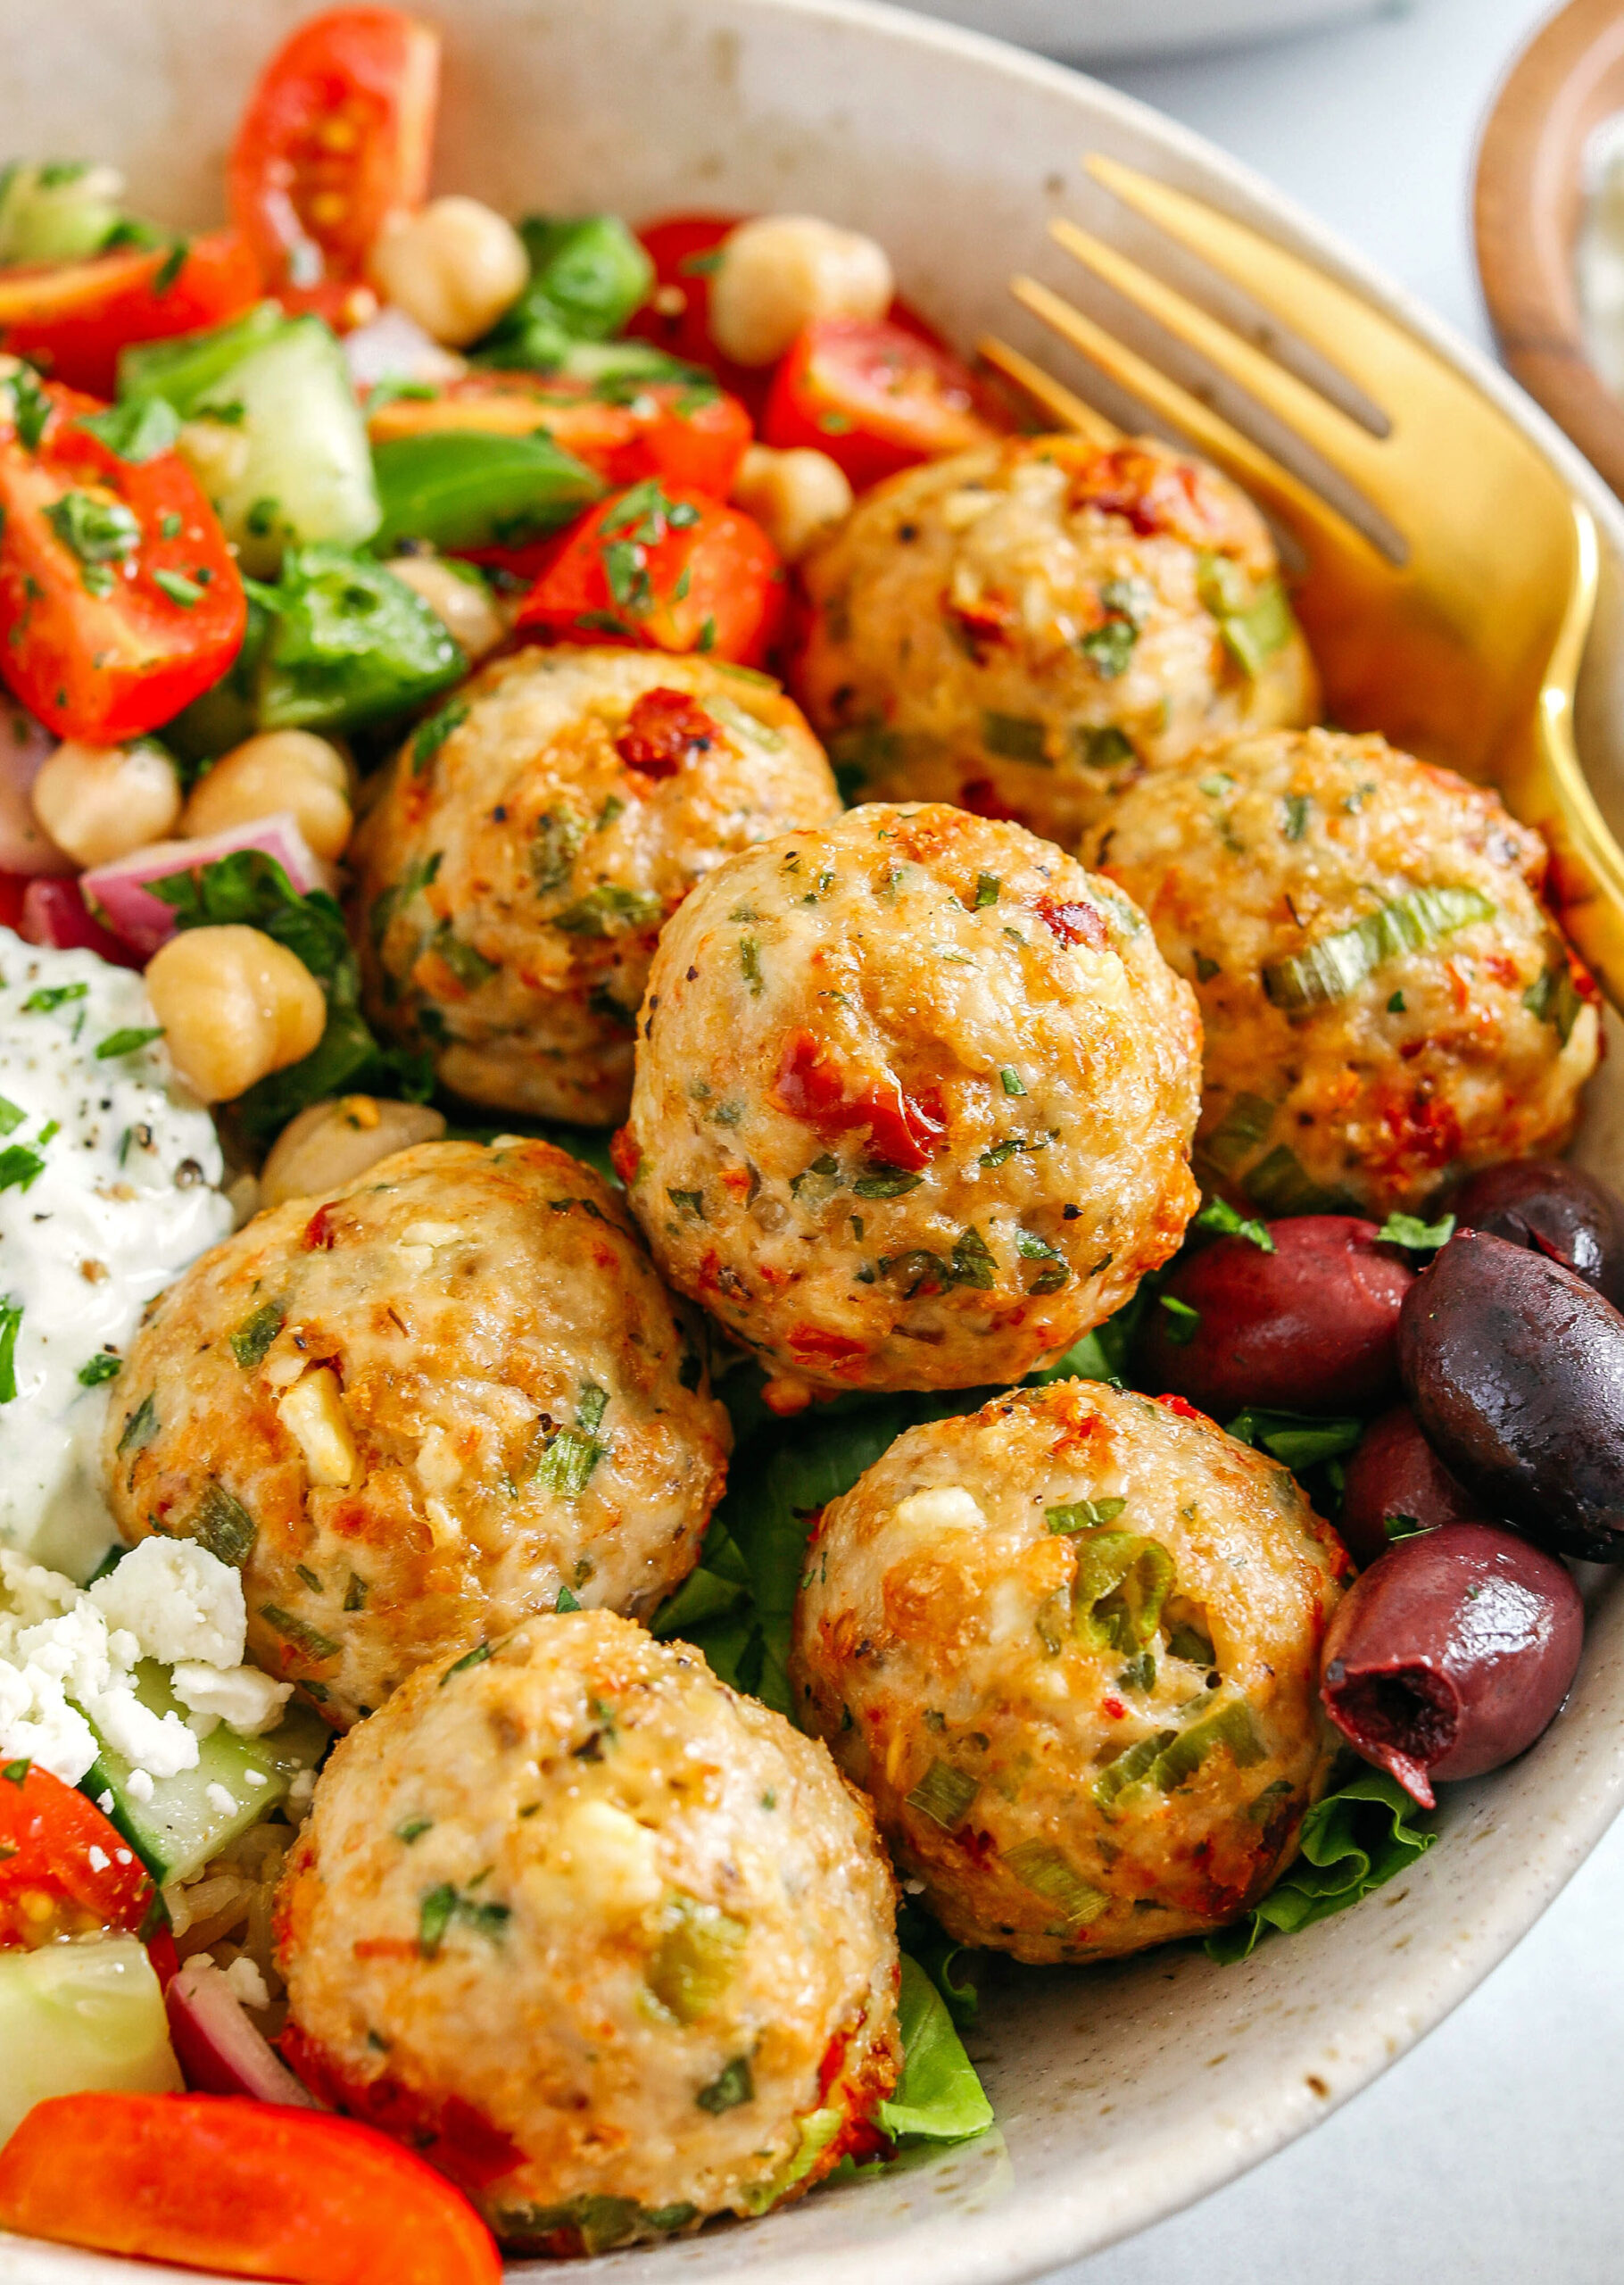 The most delicious Mediterranean Chicken Meatballs packed with flavor and easily made in under 30 minutes!  Serve with brown rice, homemade tzatziki sauce, sprinkle on some feta cheese, or pair with a tomato and chickpea salad for a complete meal!